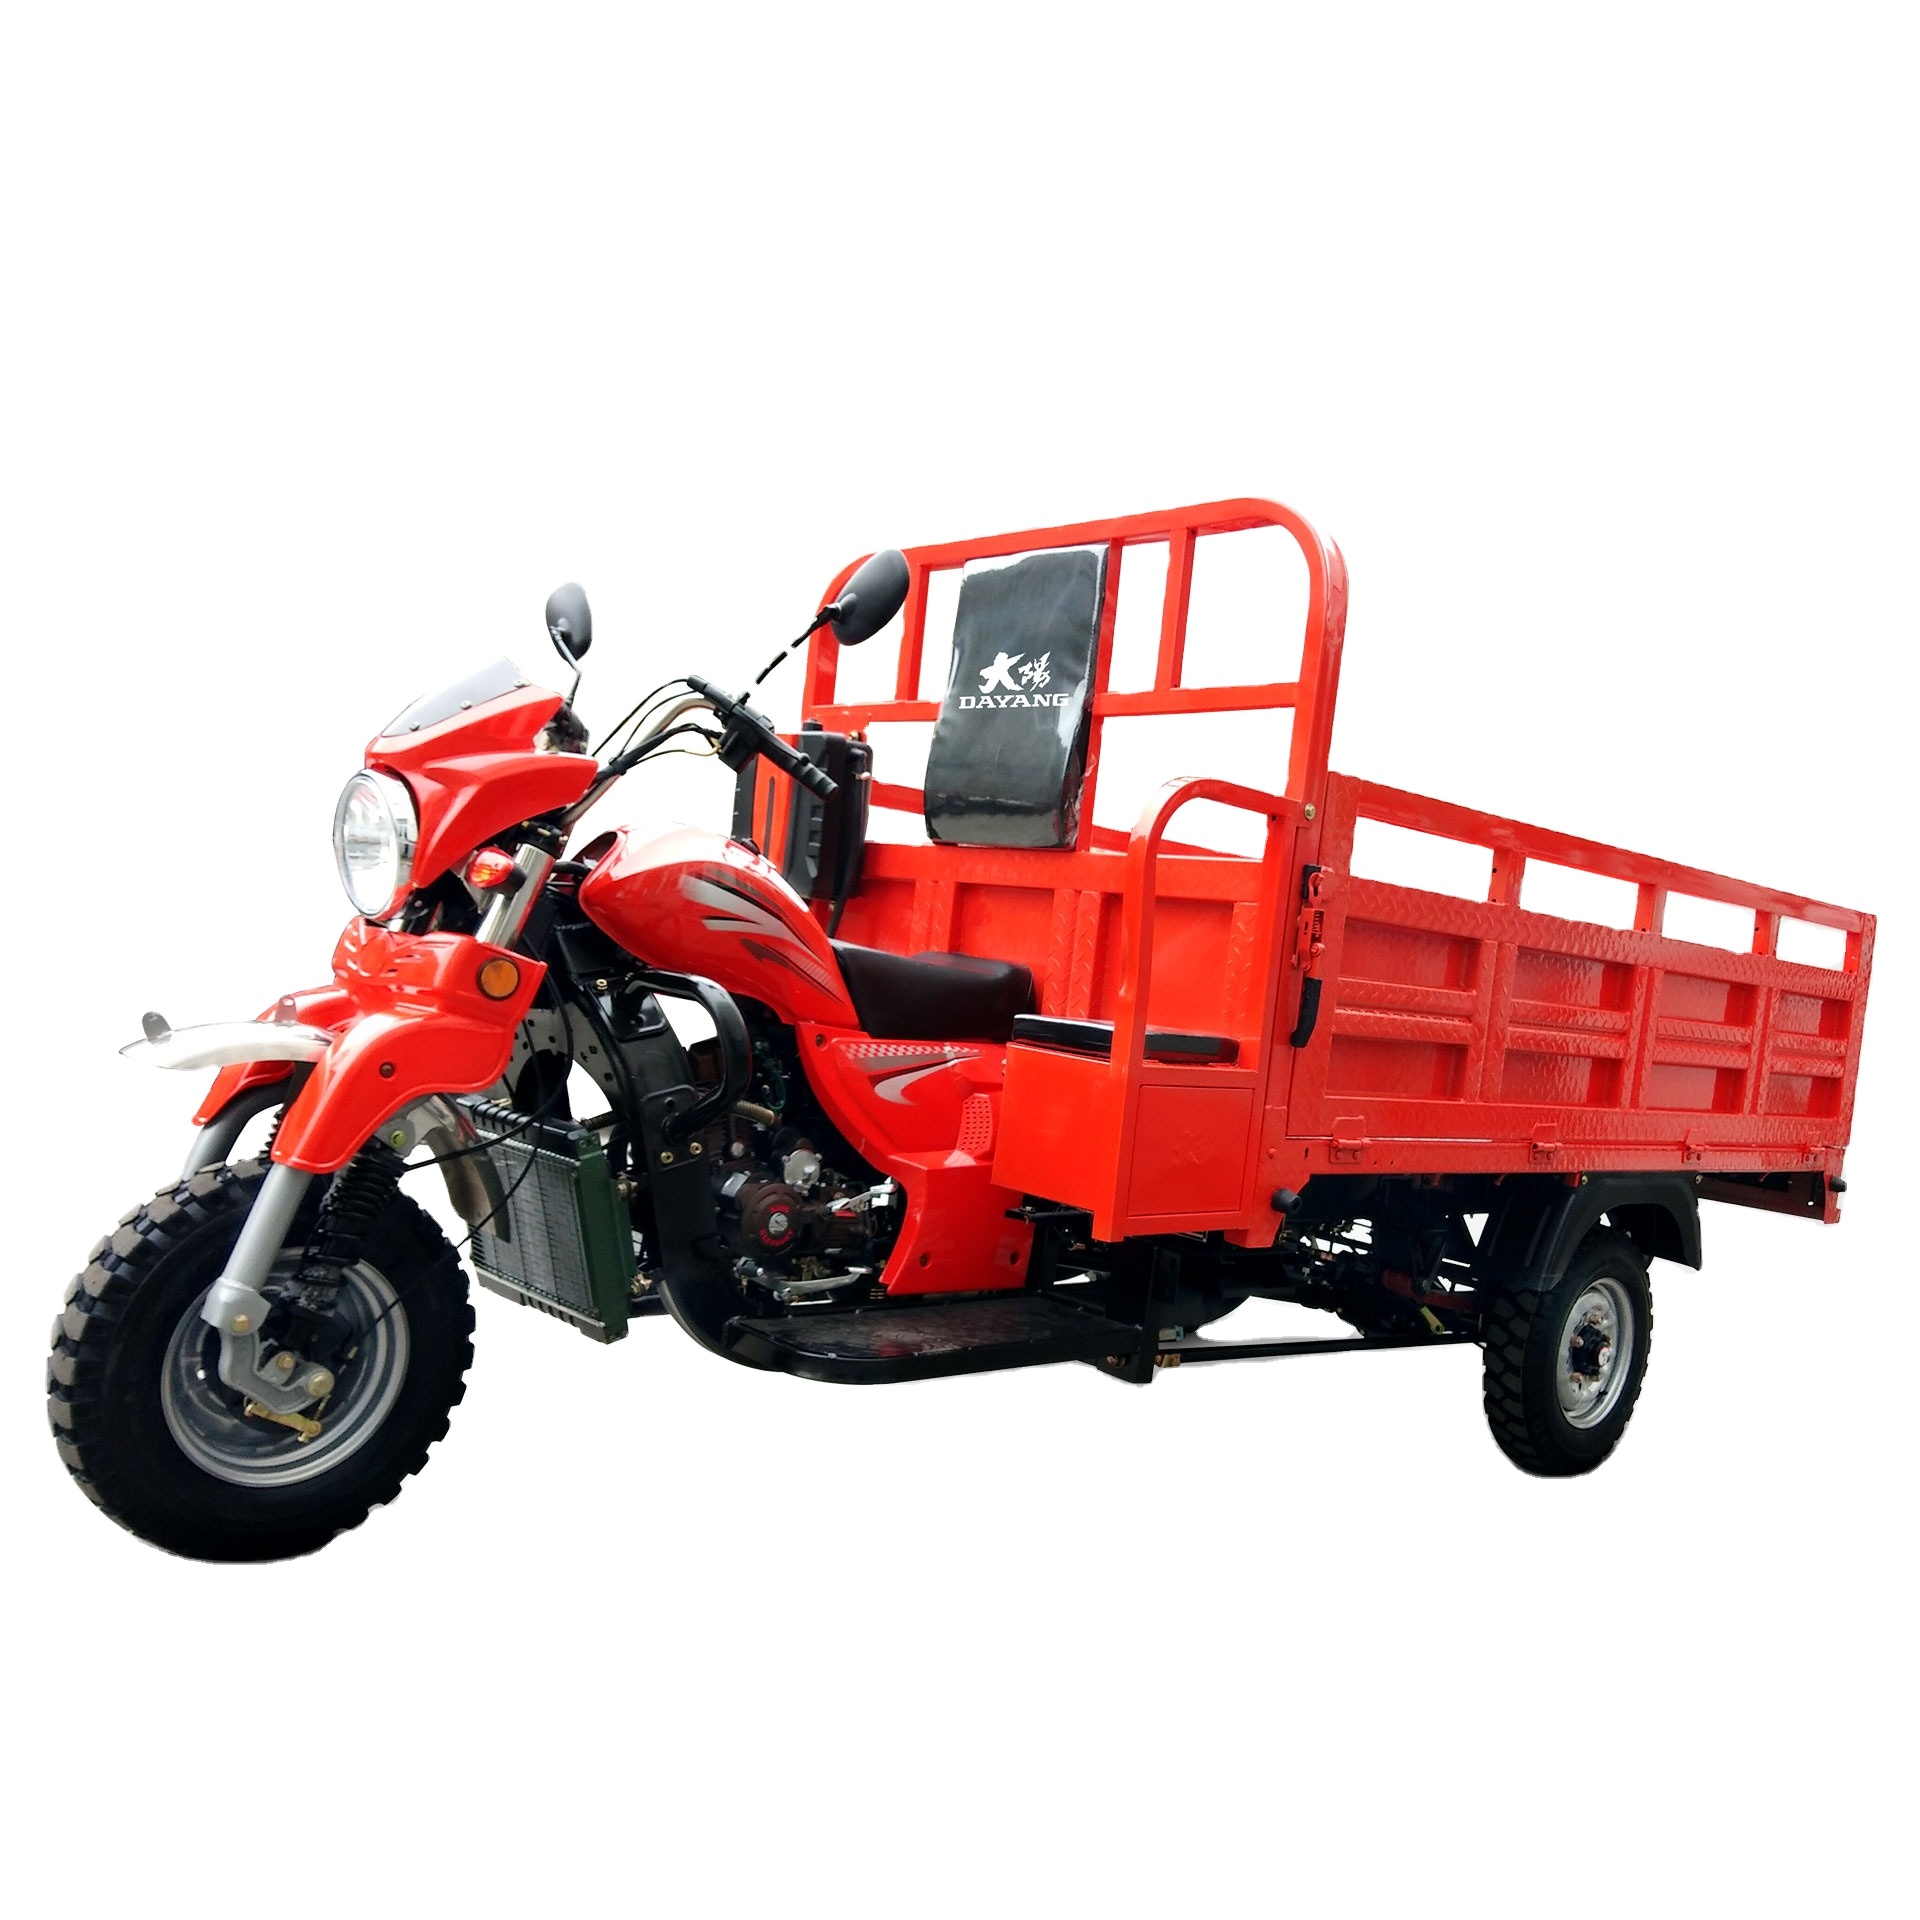 Wholesale cheapest brand new agricultural imported Lifan 250cc engine dukar tricycle cargo bike tricycle